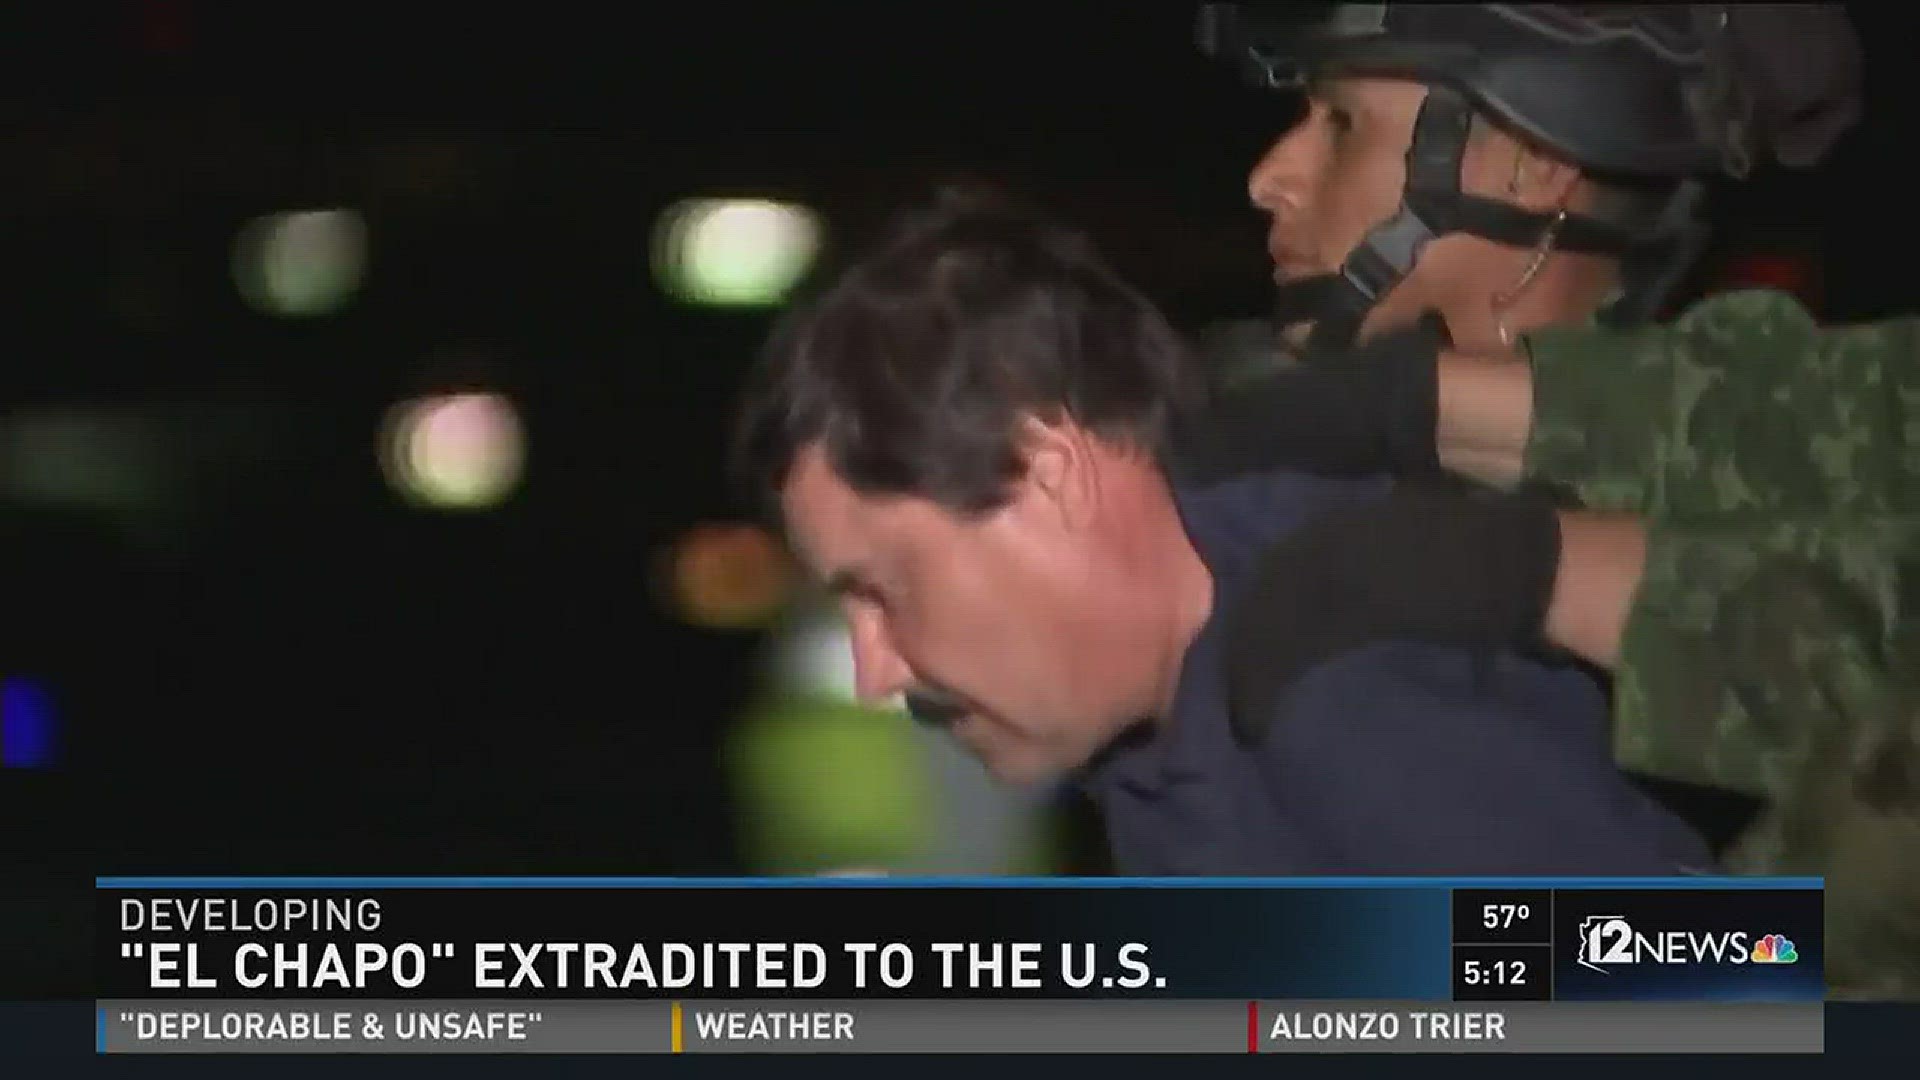 Mexico's government has confirmed it is extraditing drug lord Joaquin "El Chapo" Guzman to the United States.